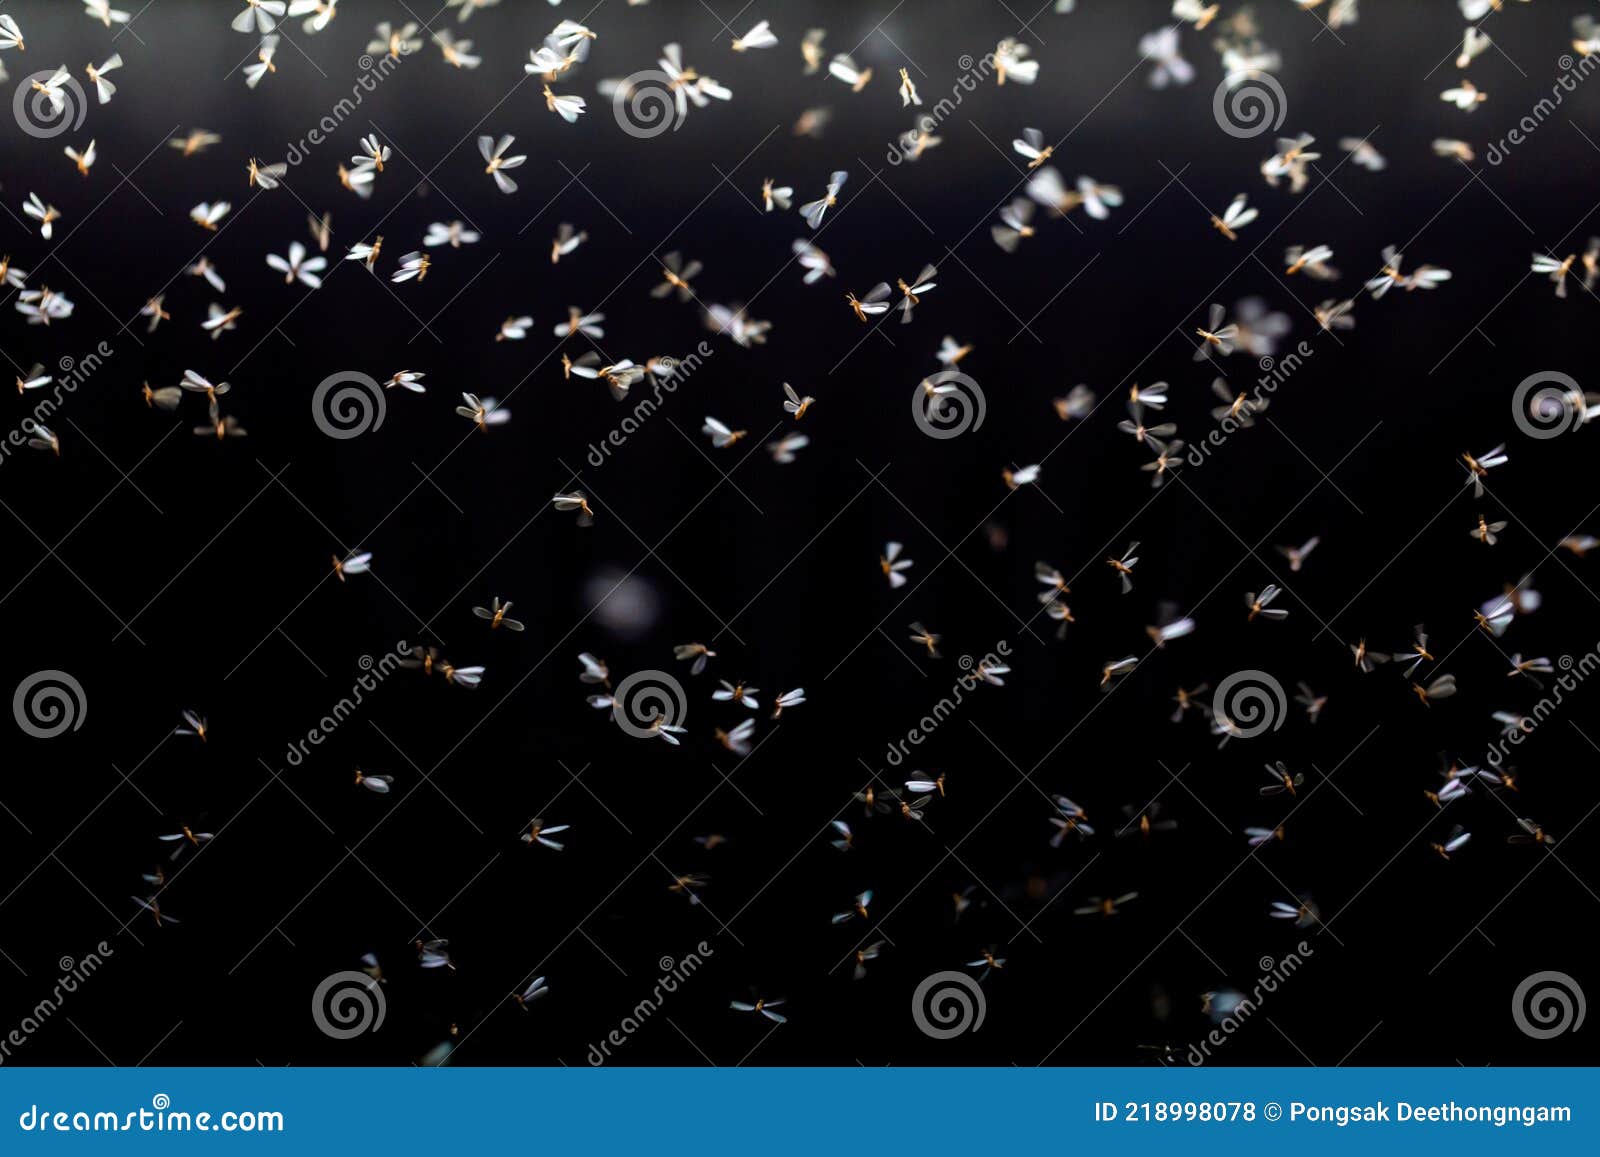 https://thumbs.dreamstime.com/z/moths-flying-to-swarm-moths-flying-to-swarm-around-lamps-218998078.jpg